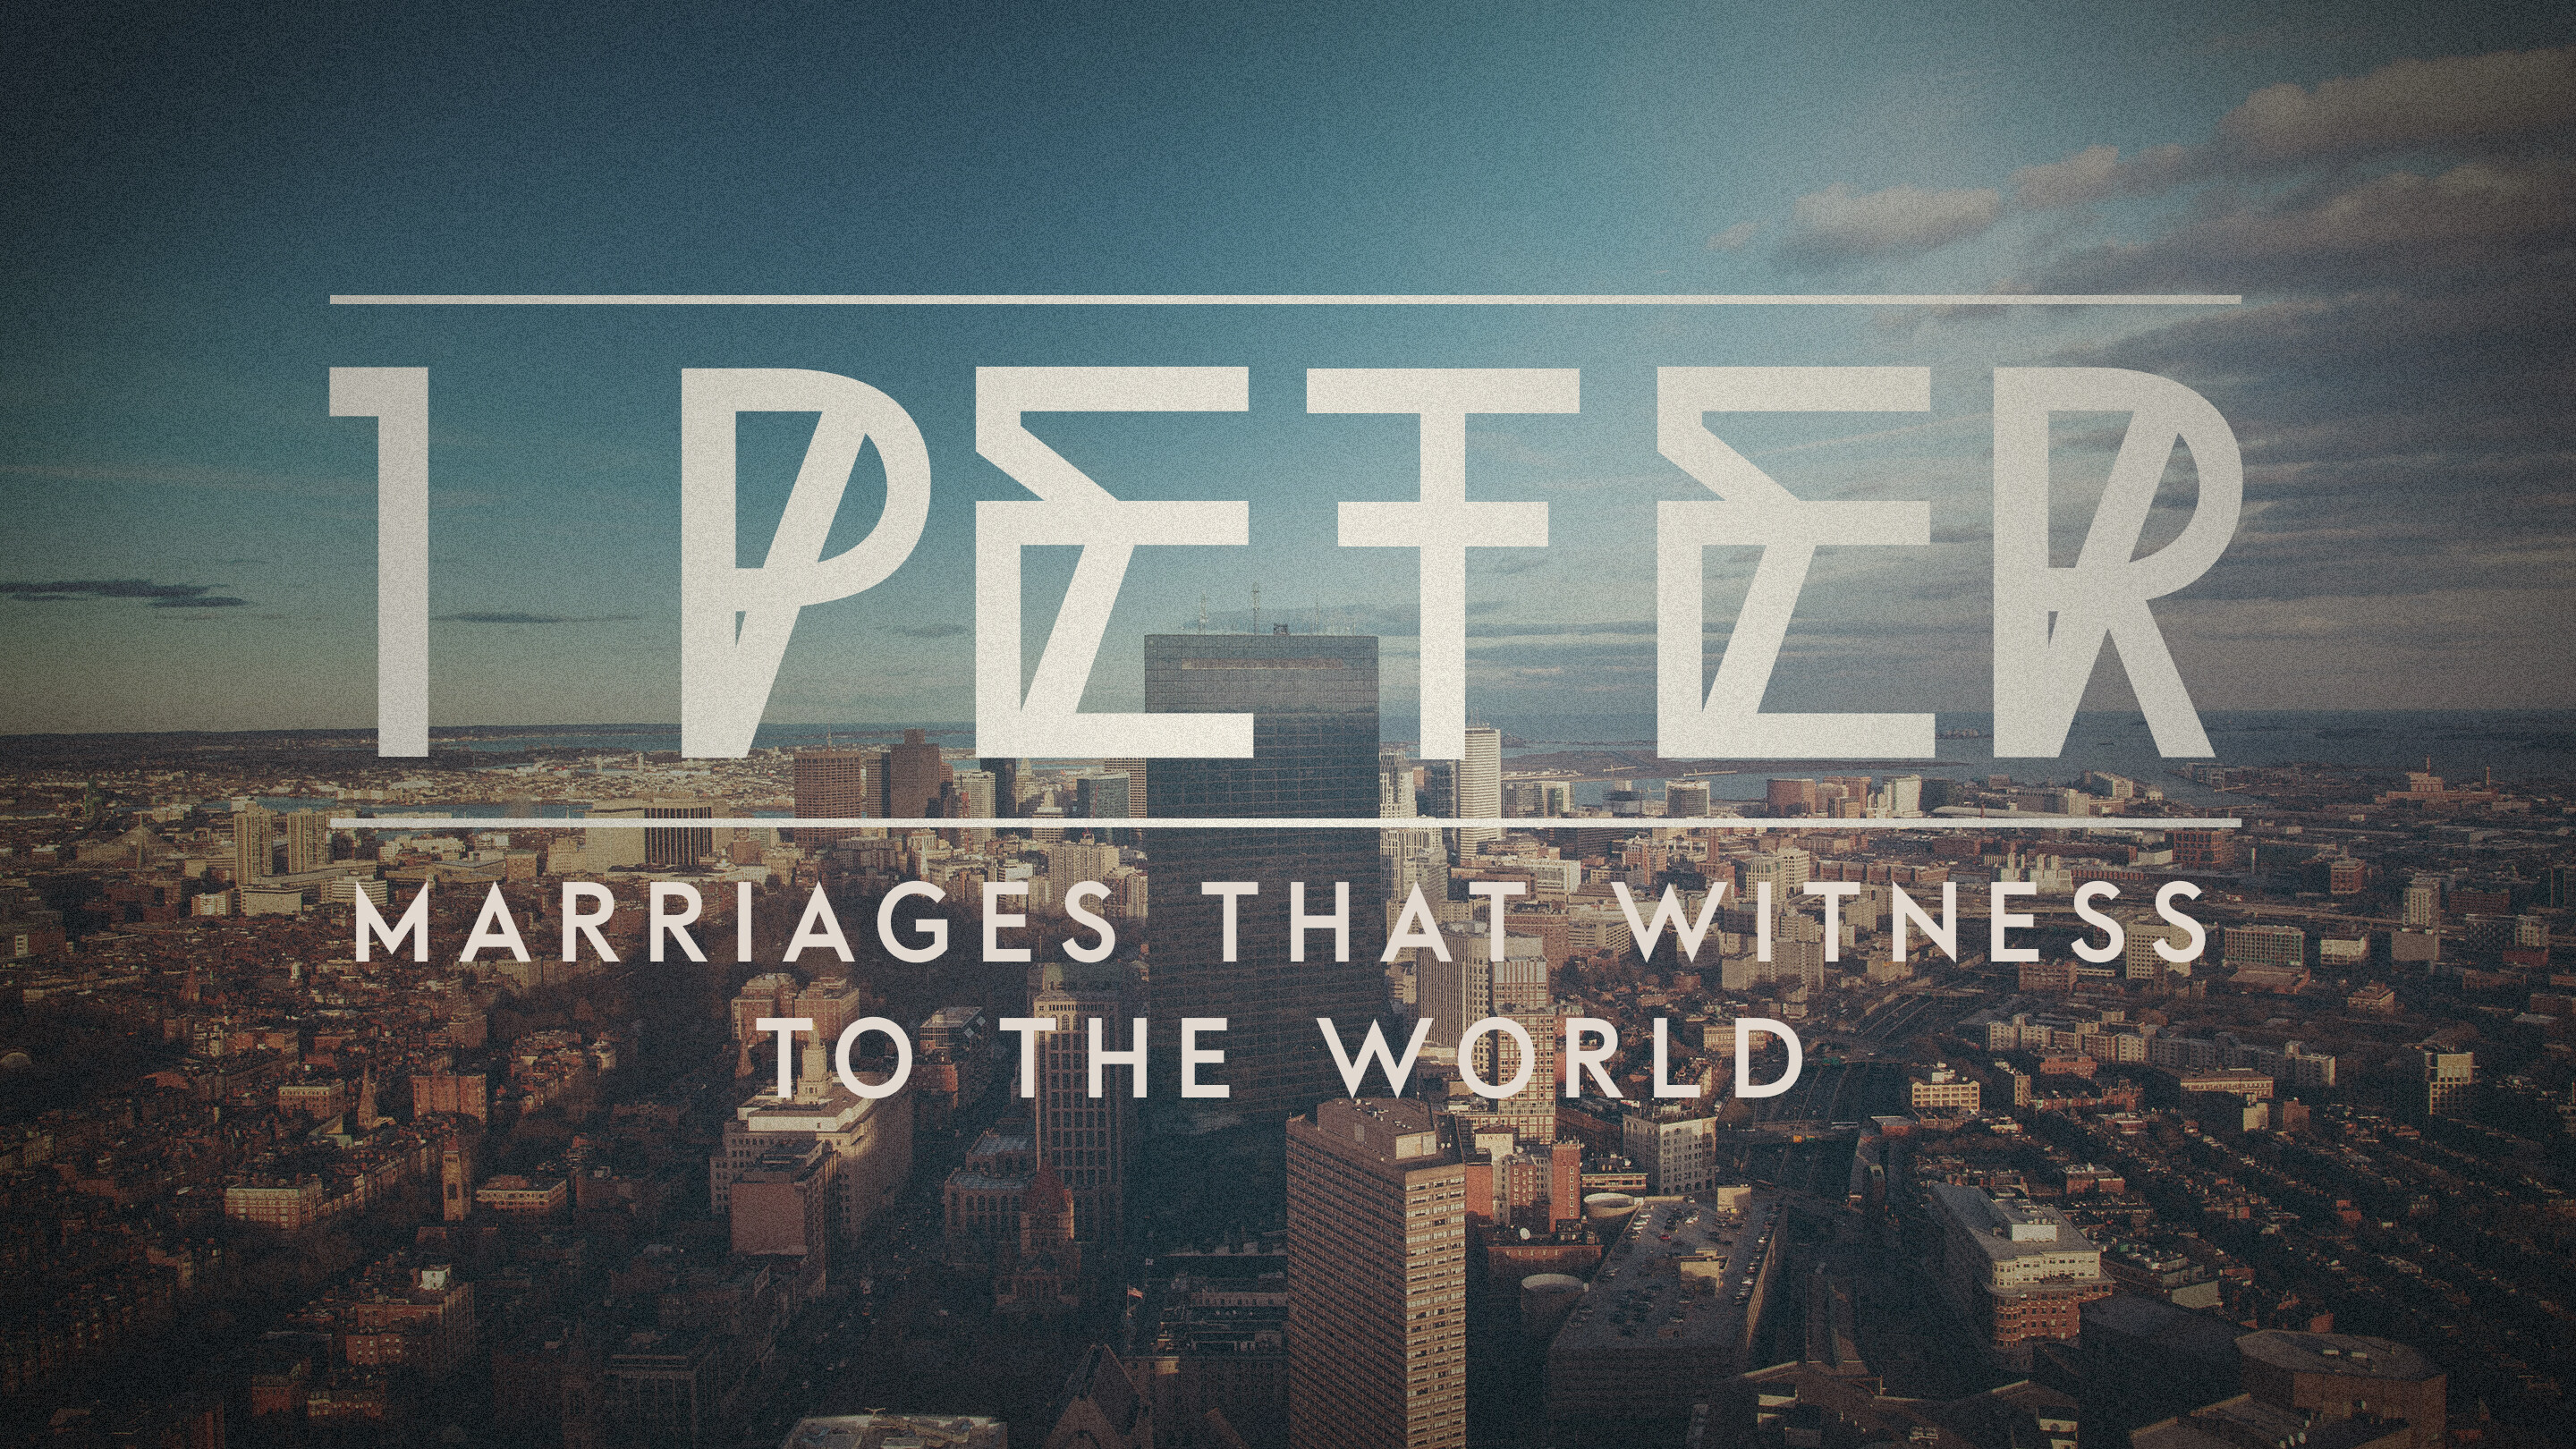 Marriages That Witness to the World